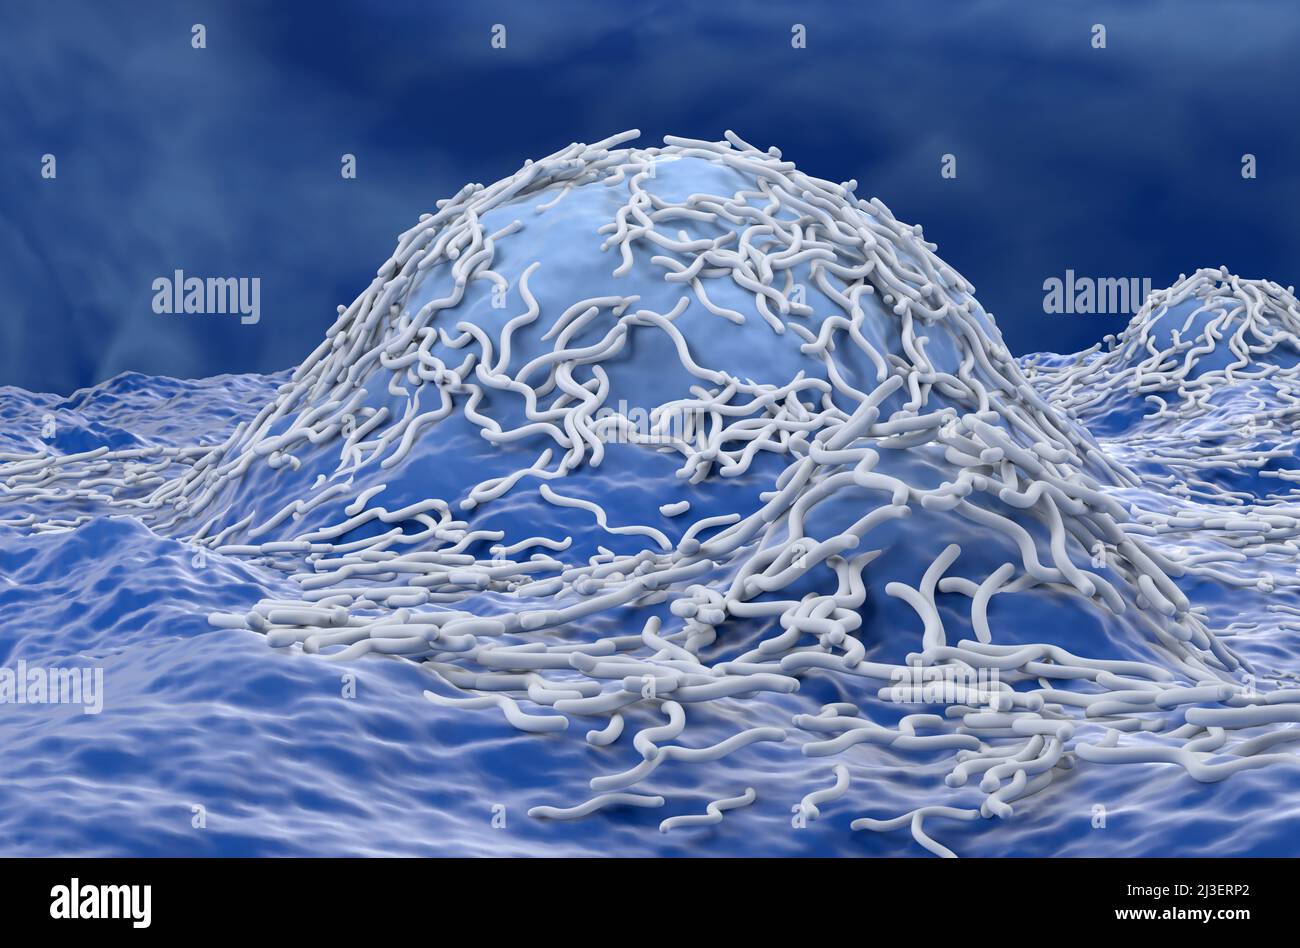 Ependymoma cancer cells (brain tumor) - side view 3d illustration Stock Photo